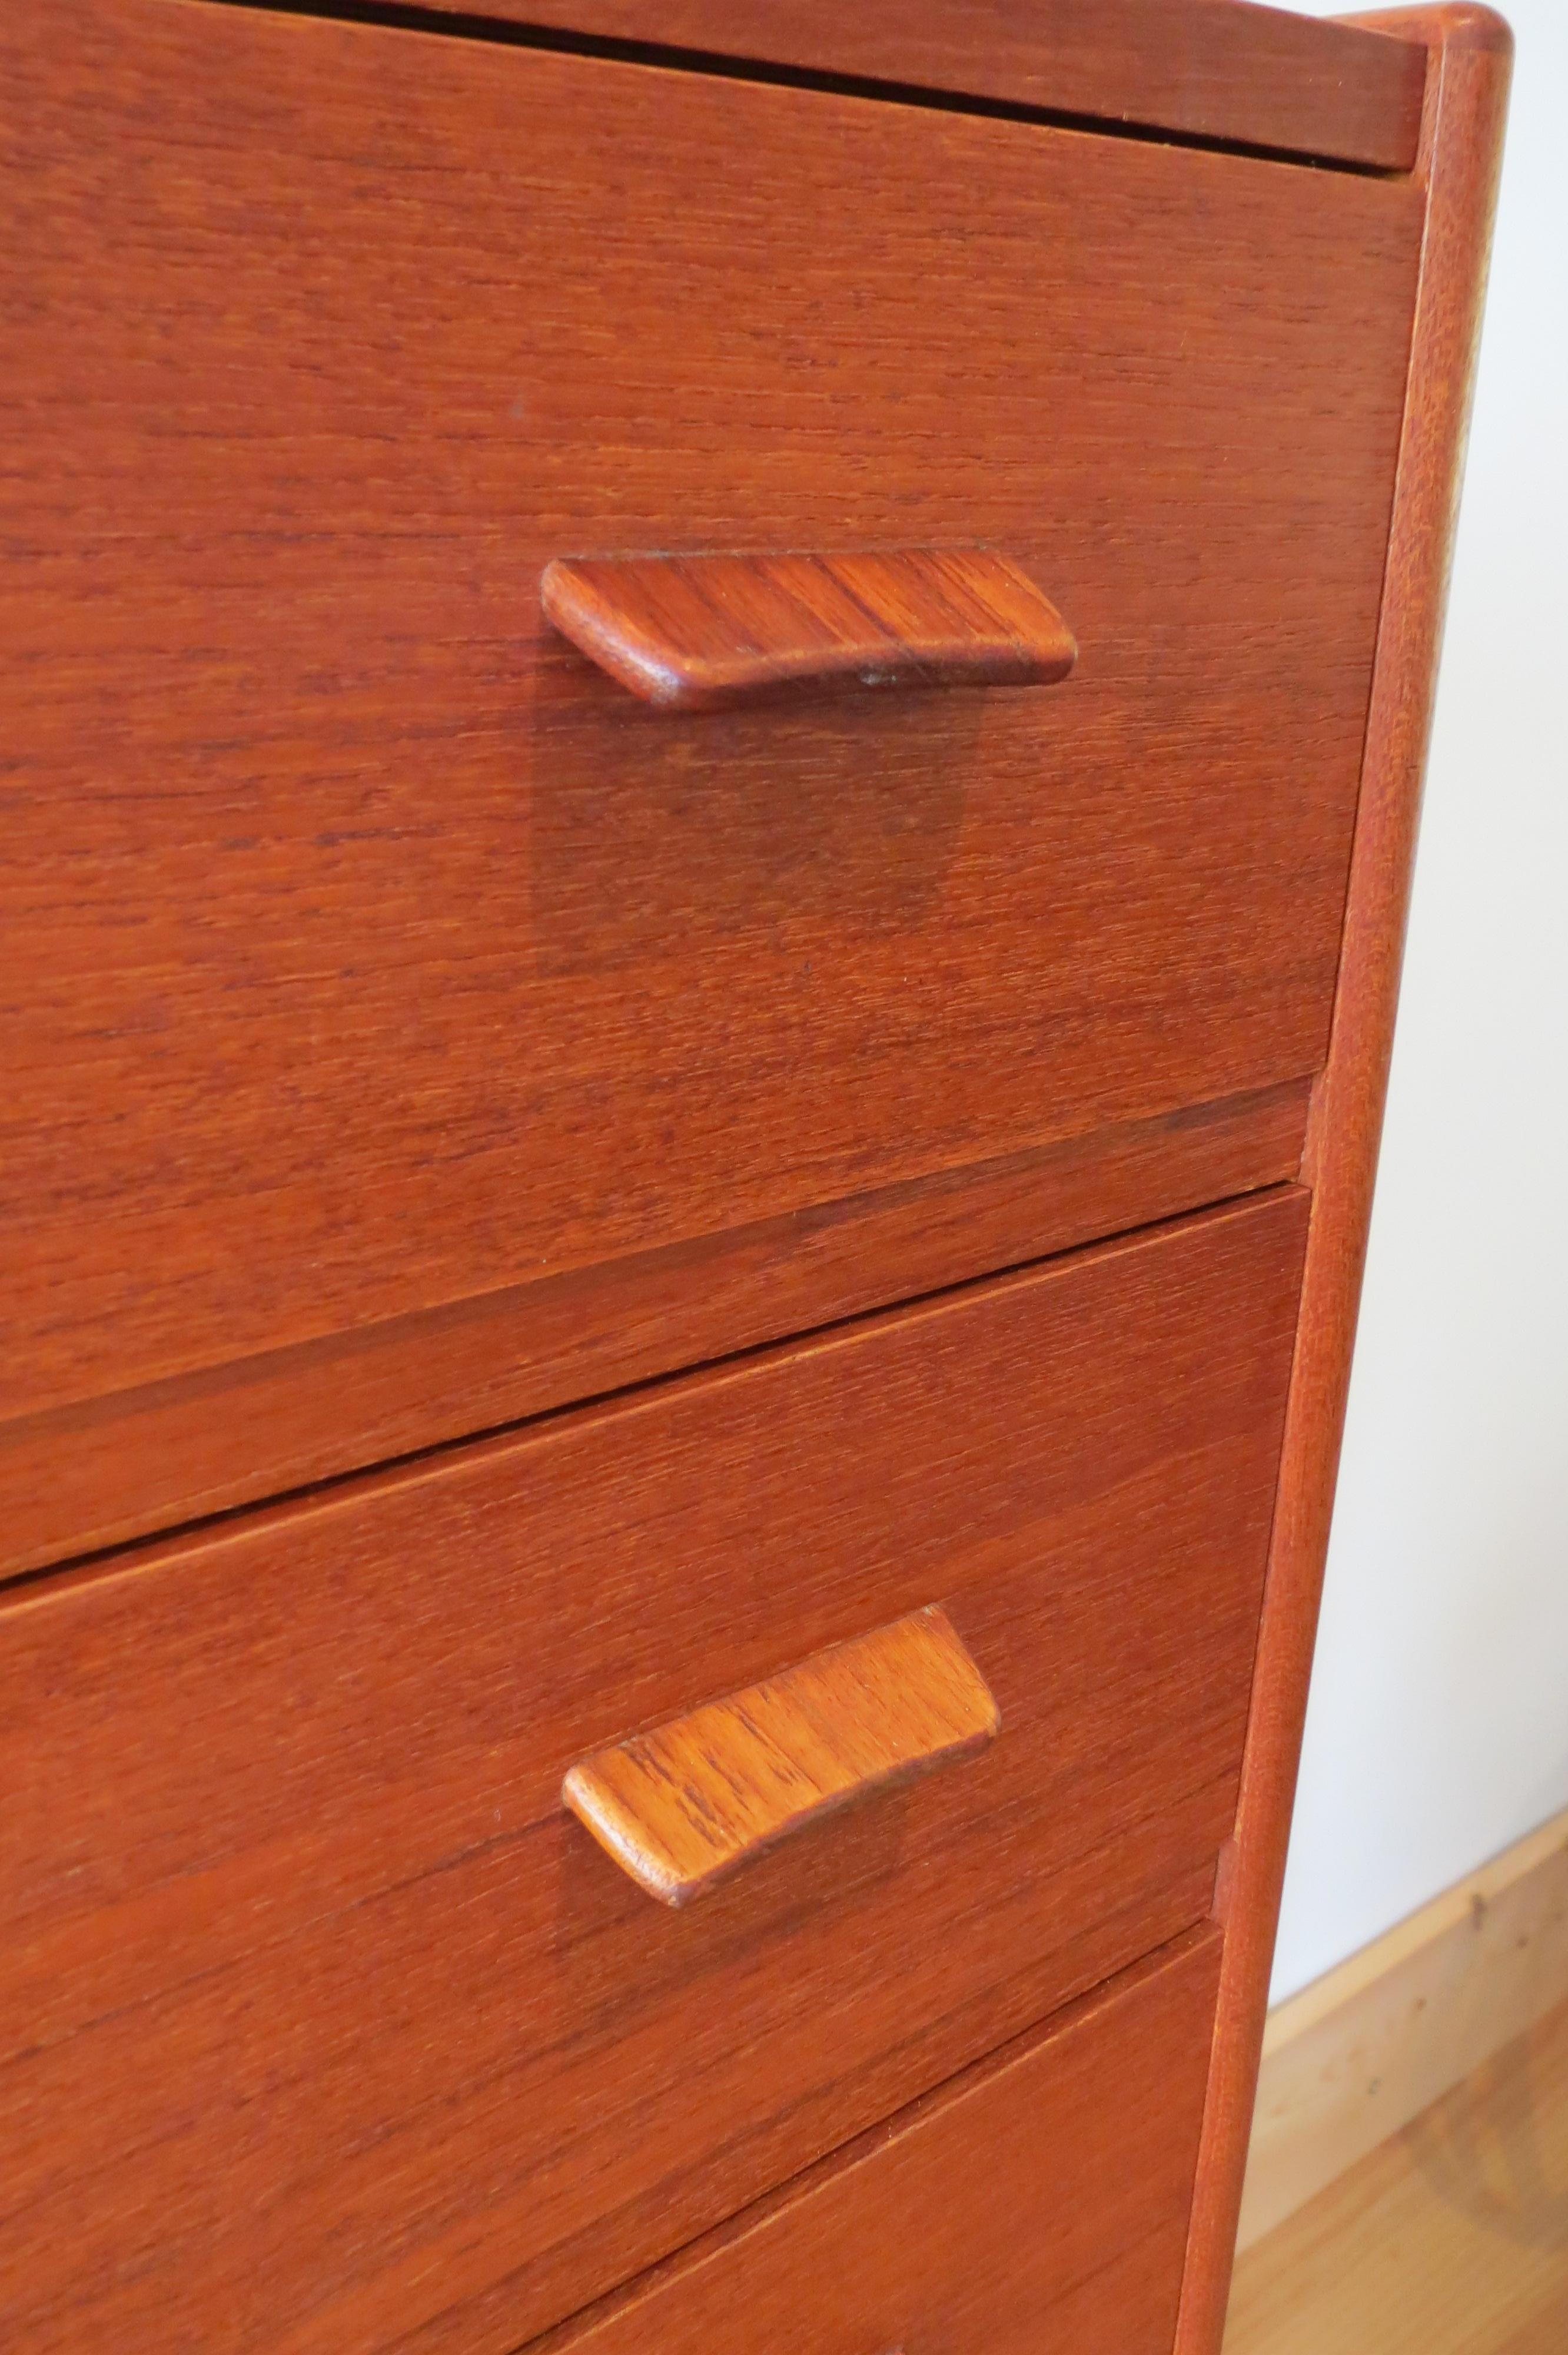 Machine-Made Danish Teak Chest of Drawers by Poul Volther for Munch Slageise, Denmark, 1960s